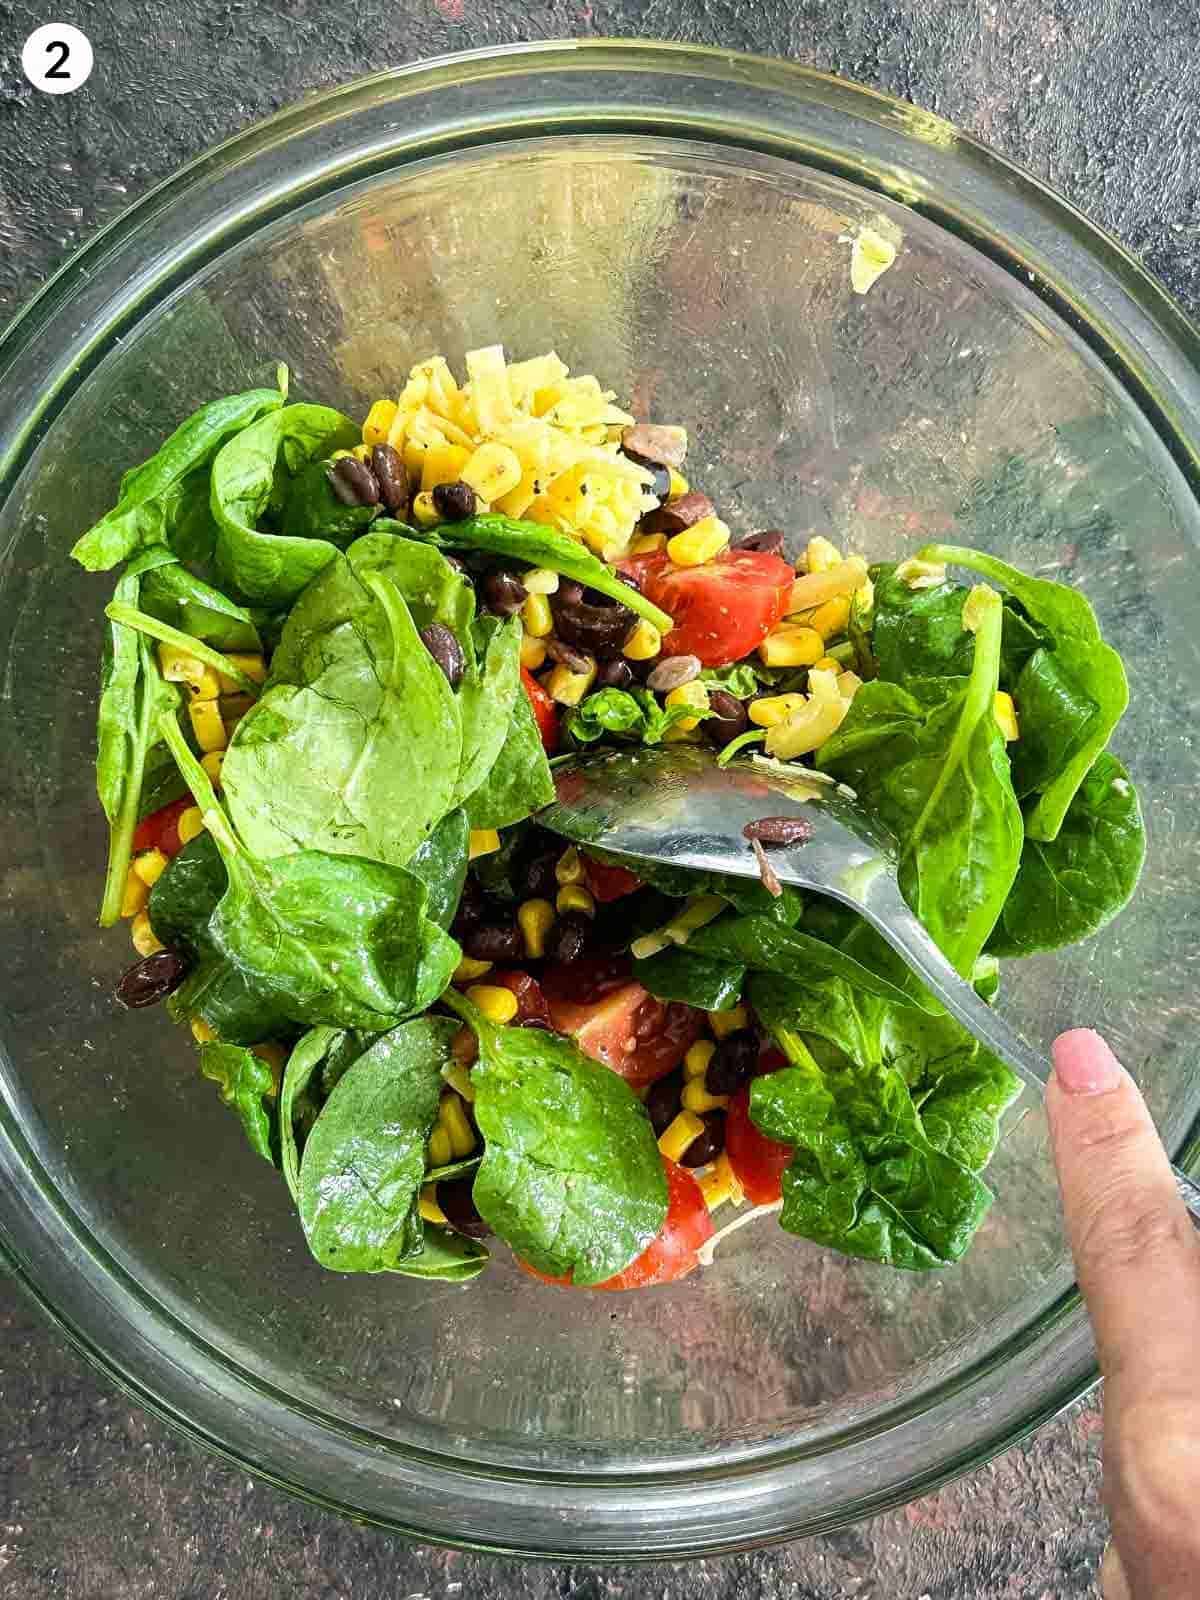 Mixing Santa Fe salad ingredients in a glass bowl with a spoon